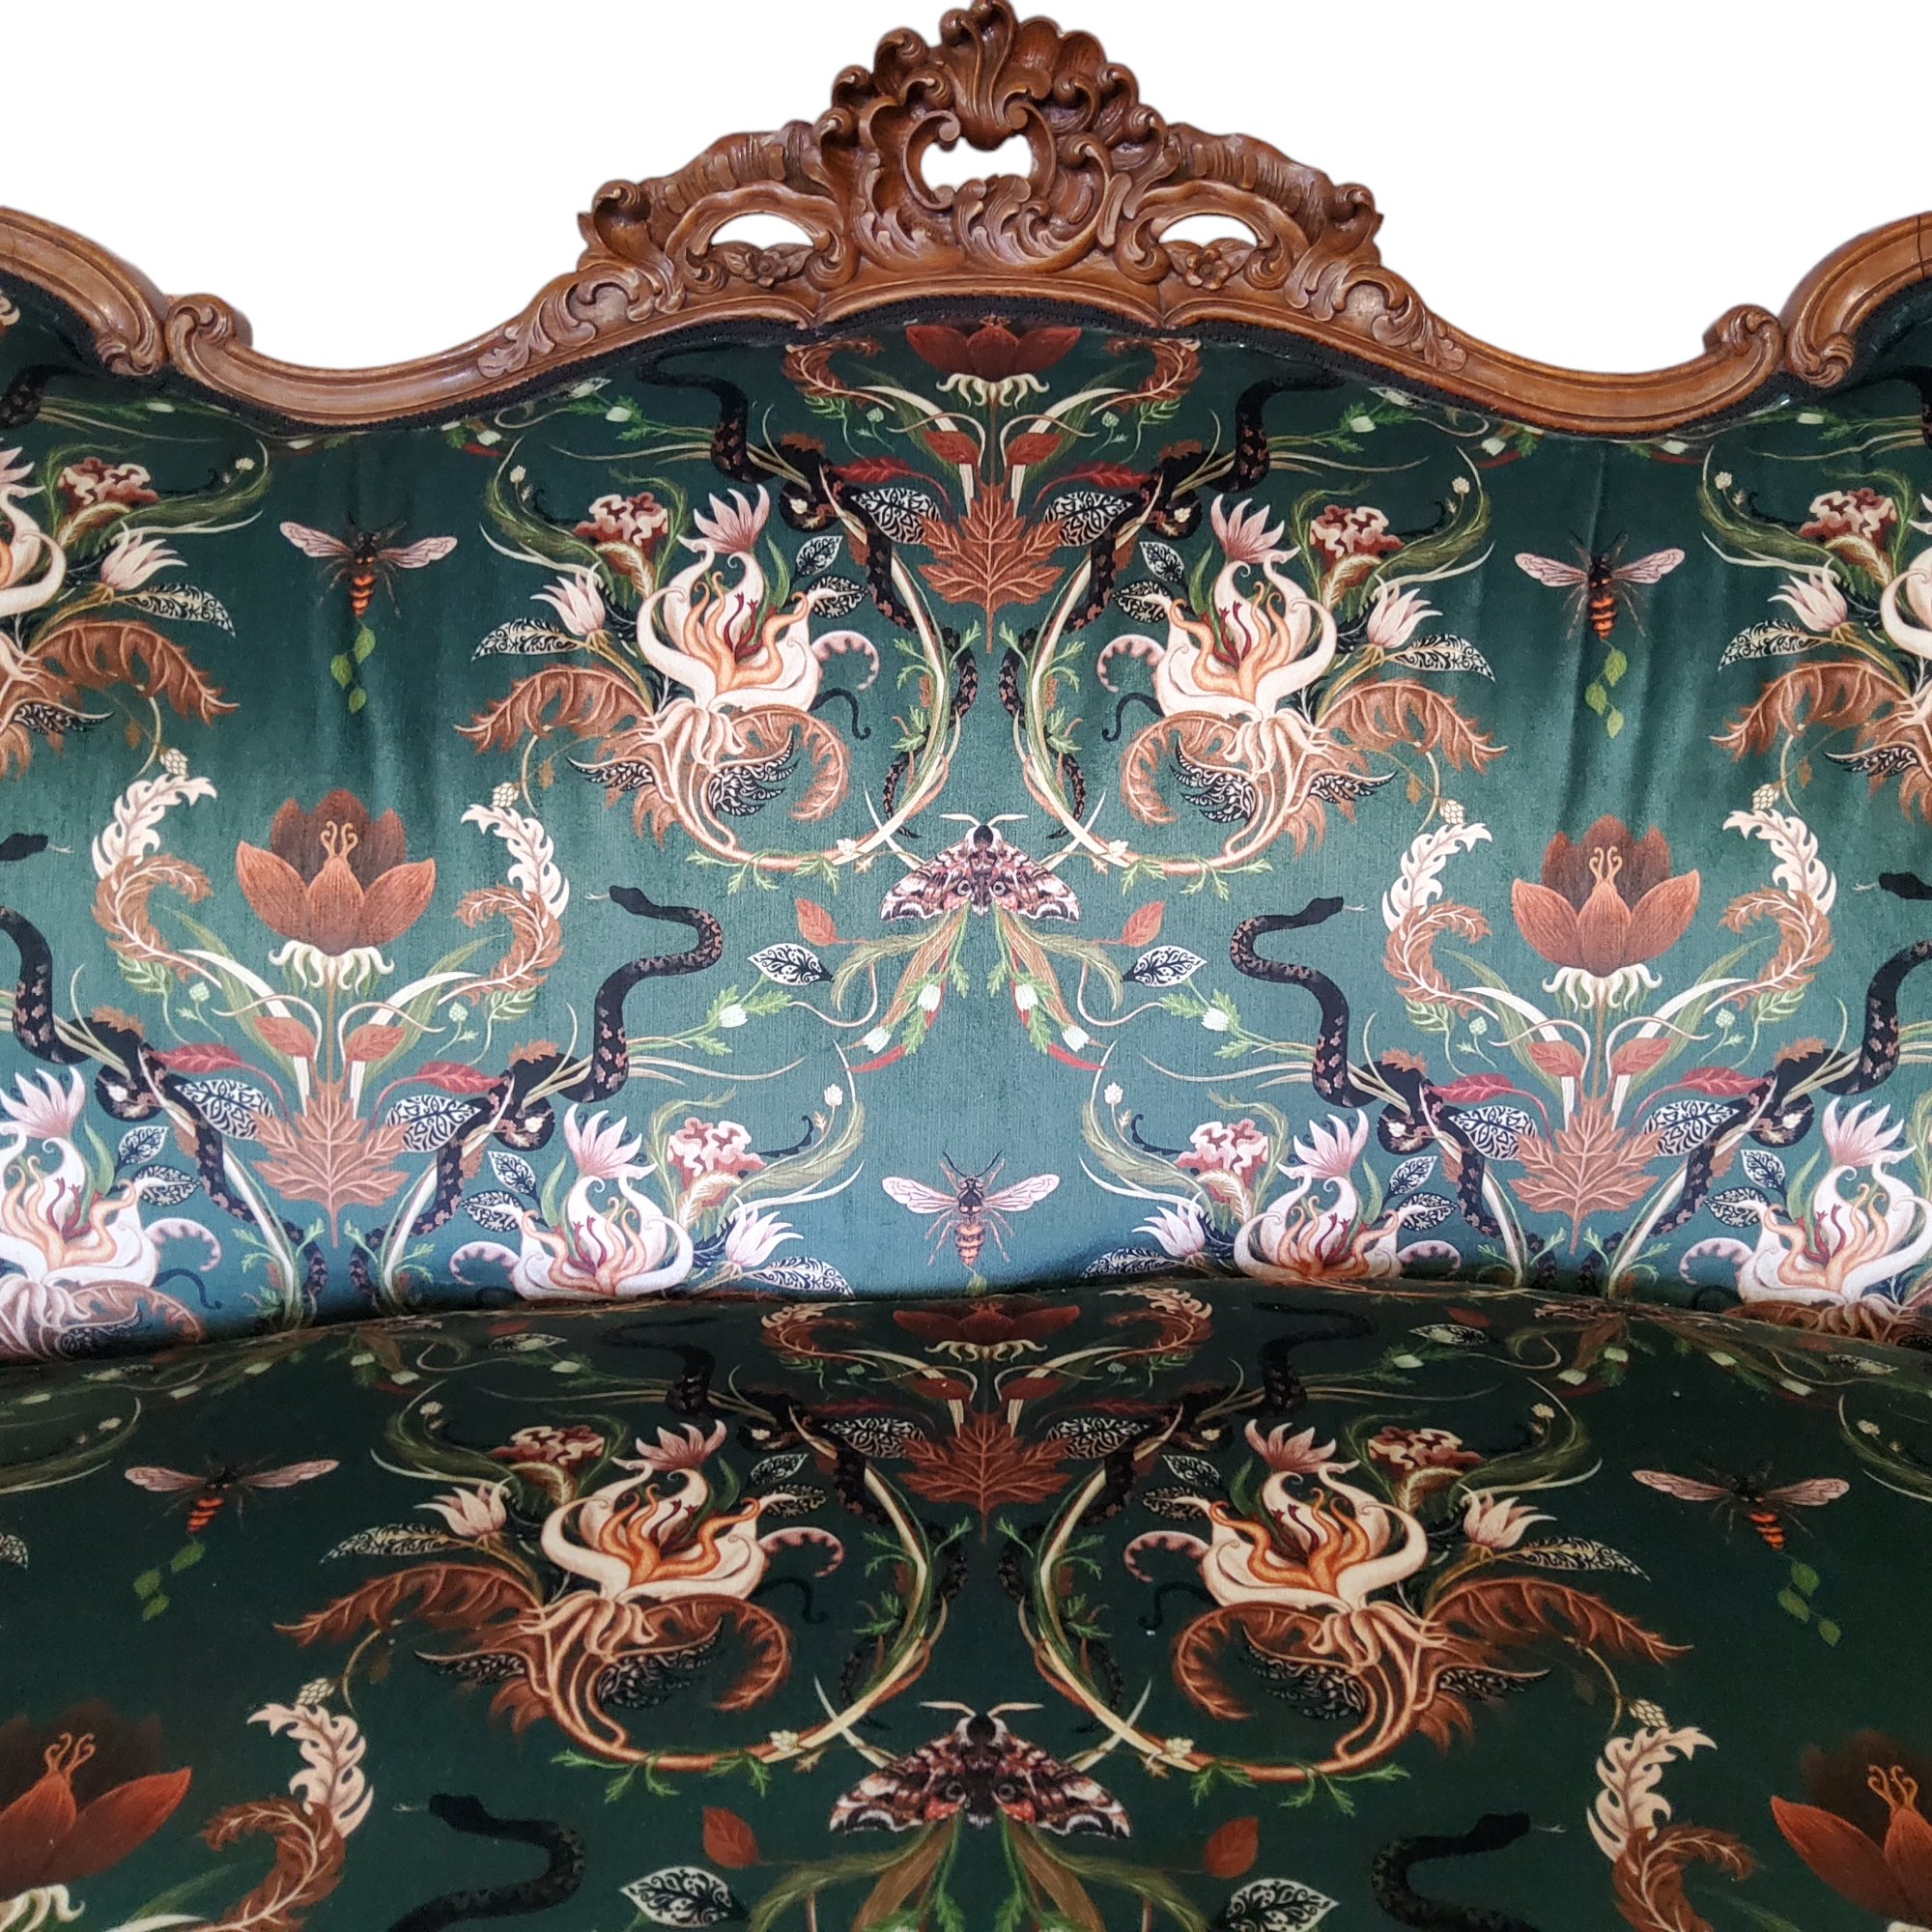 Interior Design - a 19th century French Louis XVI walnut salon sofa, traditionally upholstered - Image 2 of 3